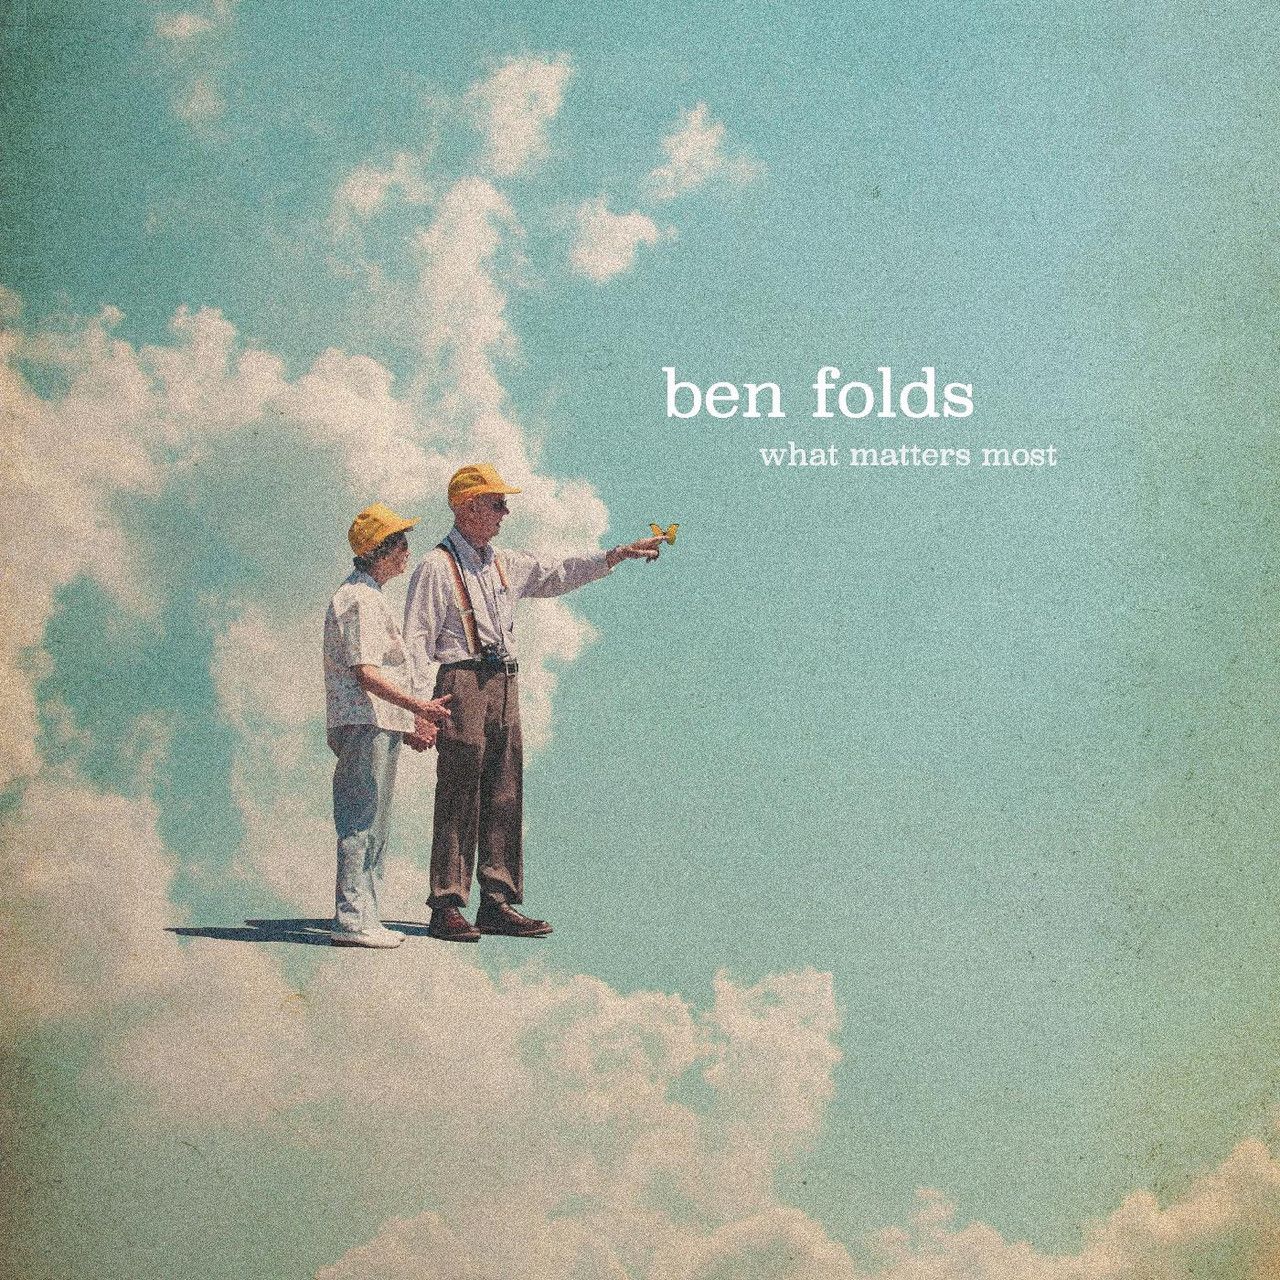 The image is an album cover. An elderly couple holding hands on a sky background. Words in white read "ben folds" and in smaller printe it reads "what matters most". what matters most.